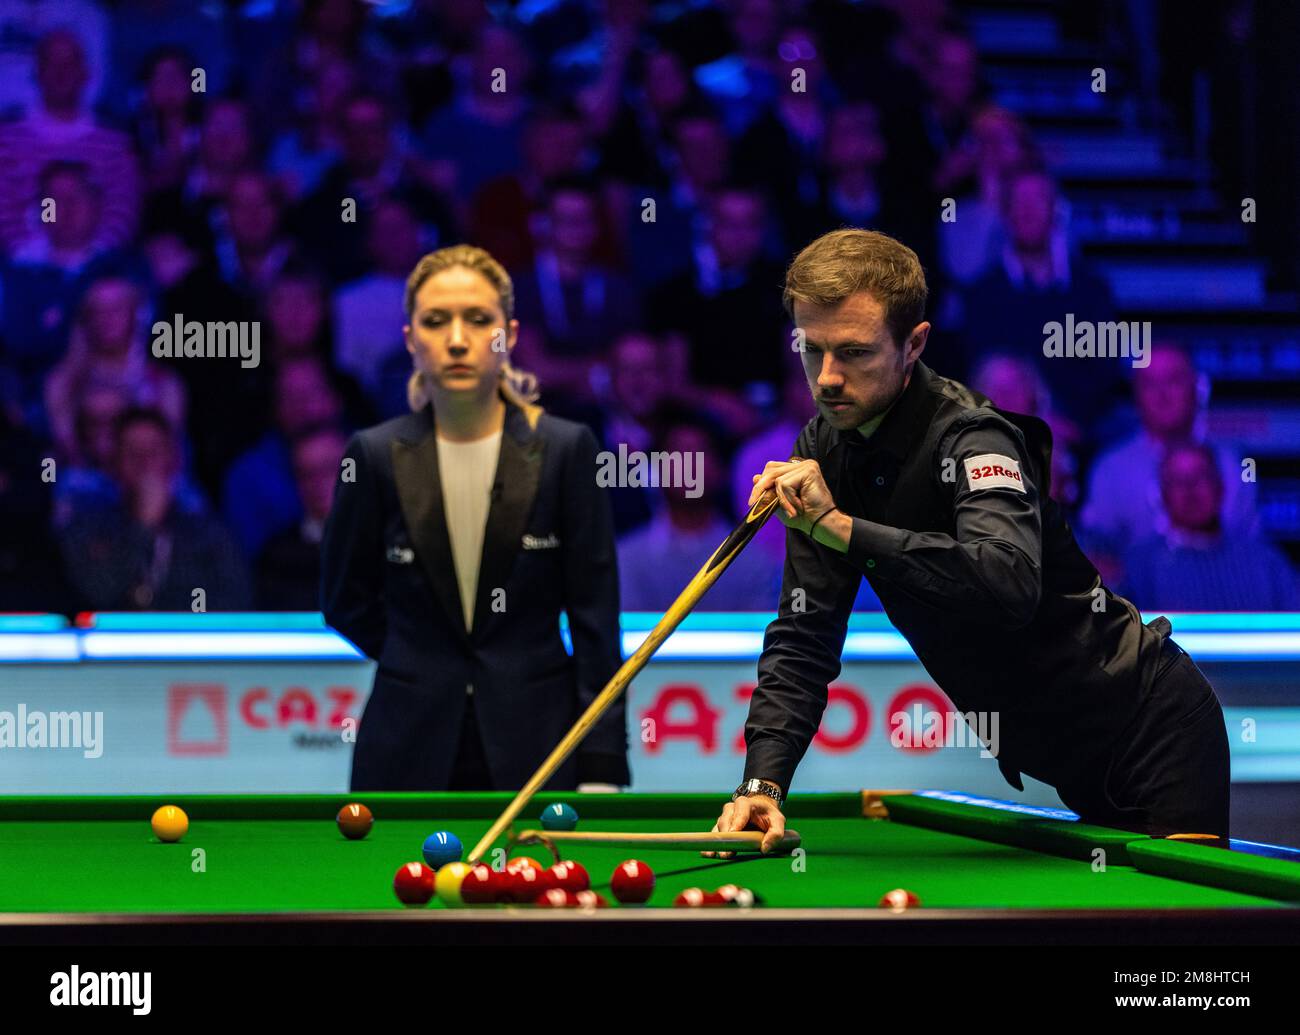 Jack Lisowski in action during day seven of the Cazoo Masters at Alexandra Palace, London